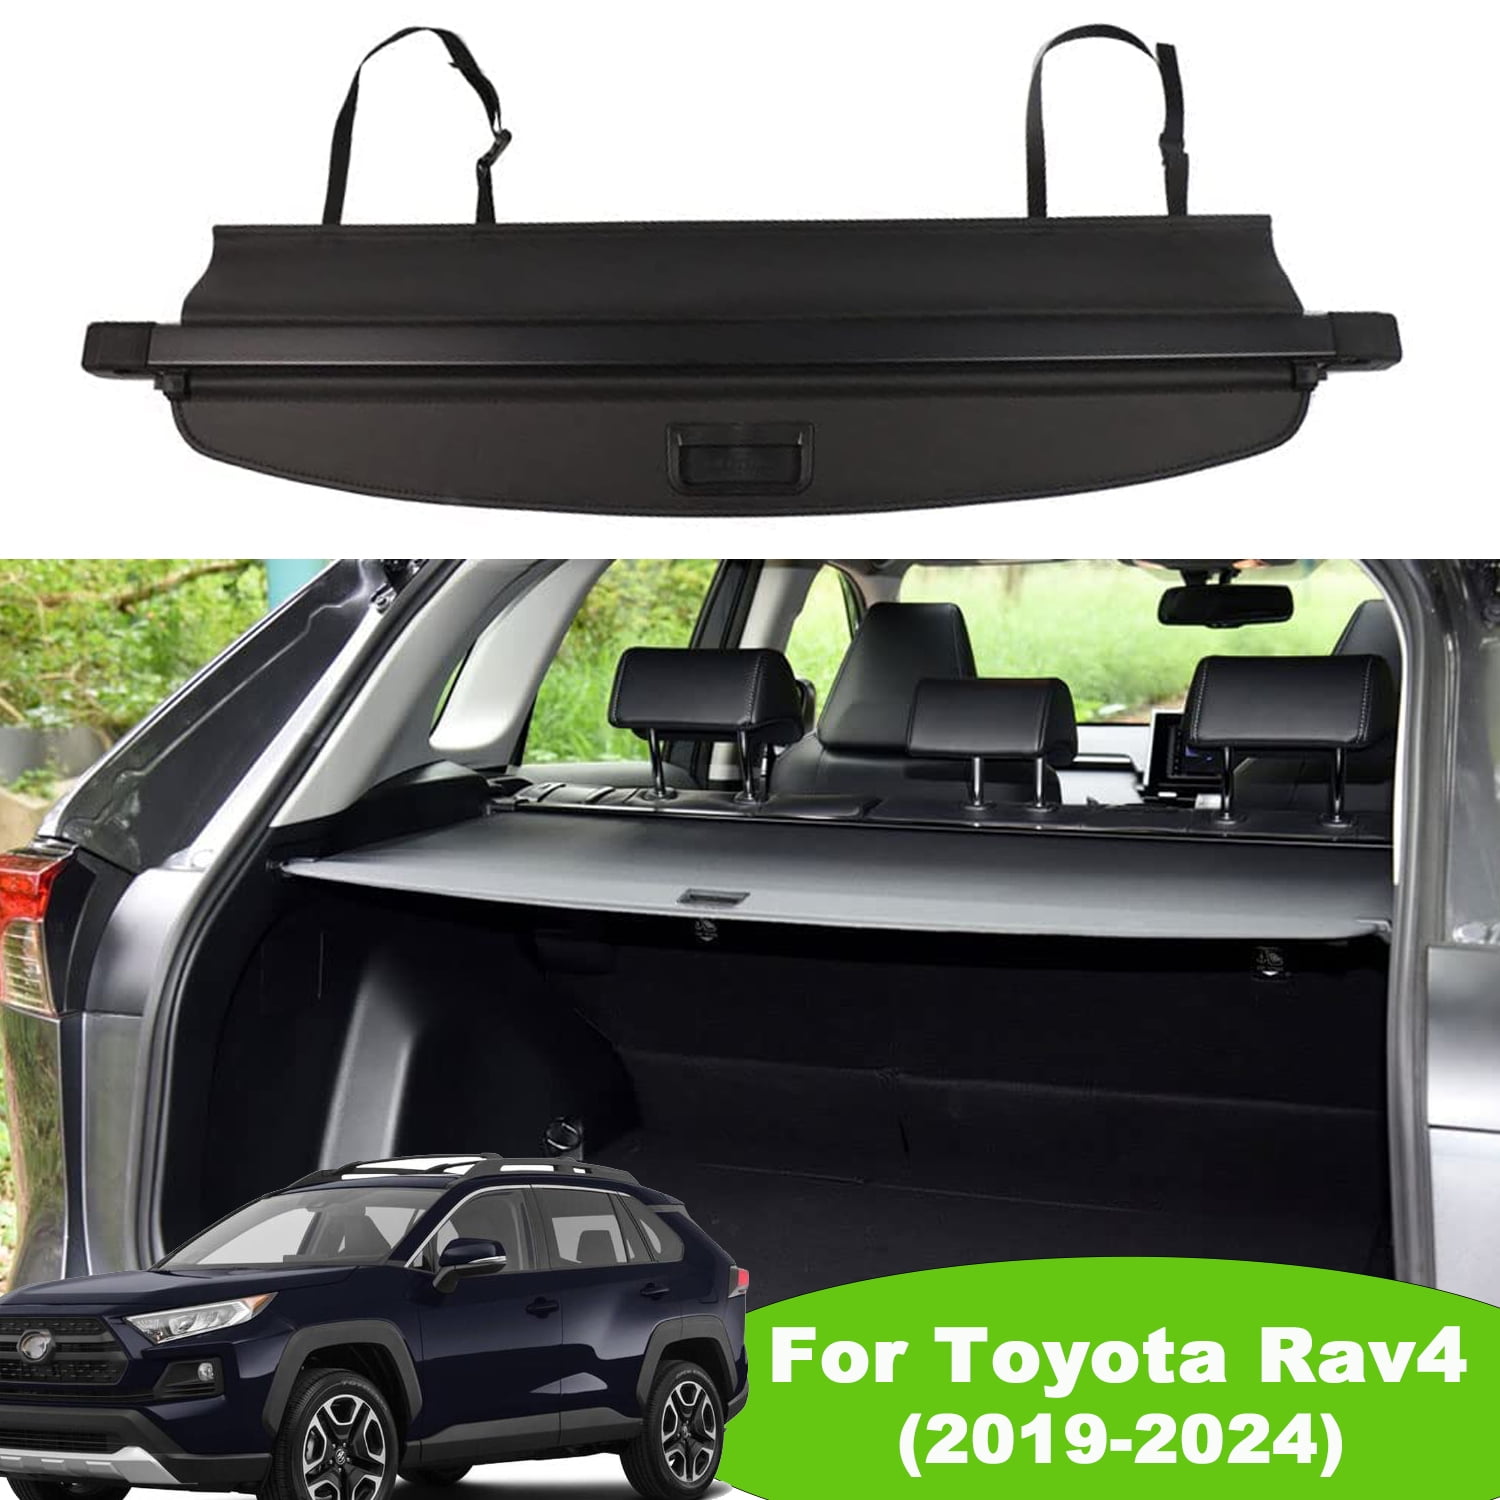 Retractable Trunk Cargo Cover Luggage Shade Shield For 2020-2024